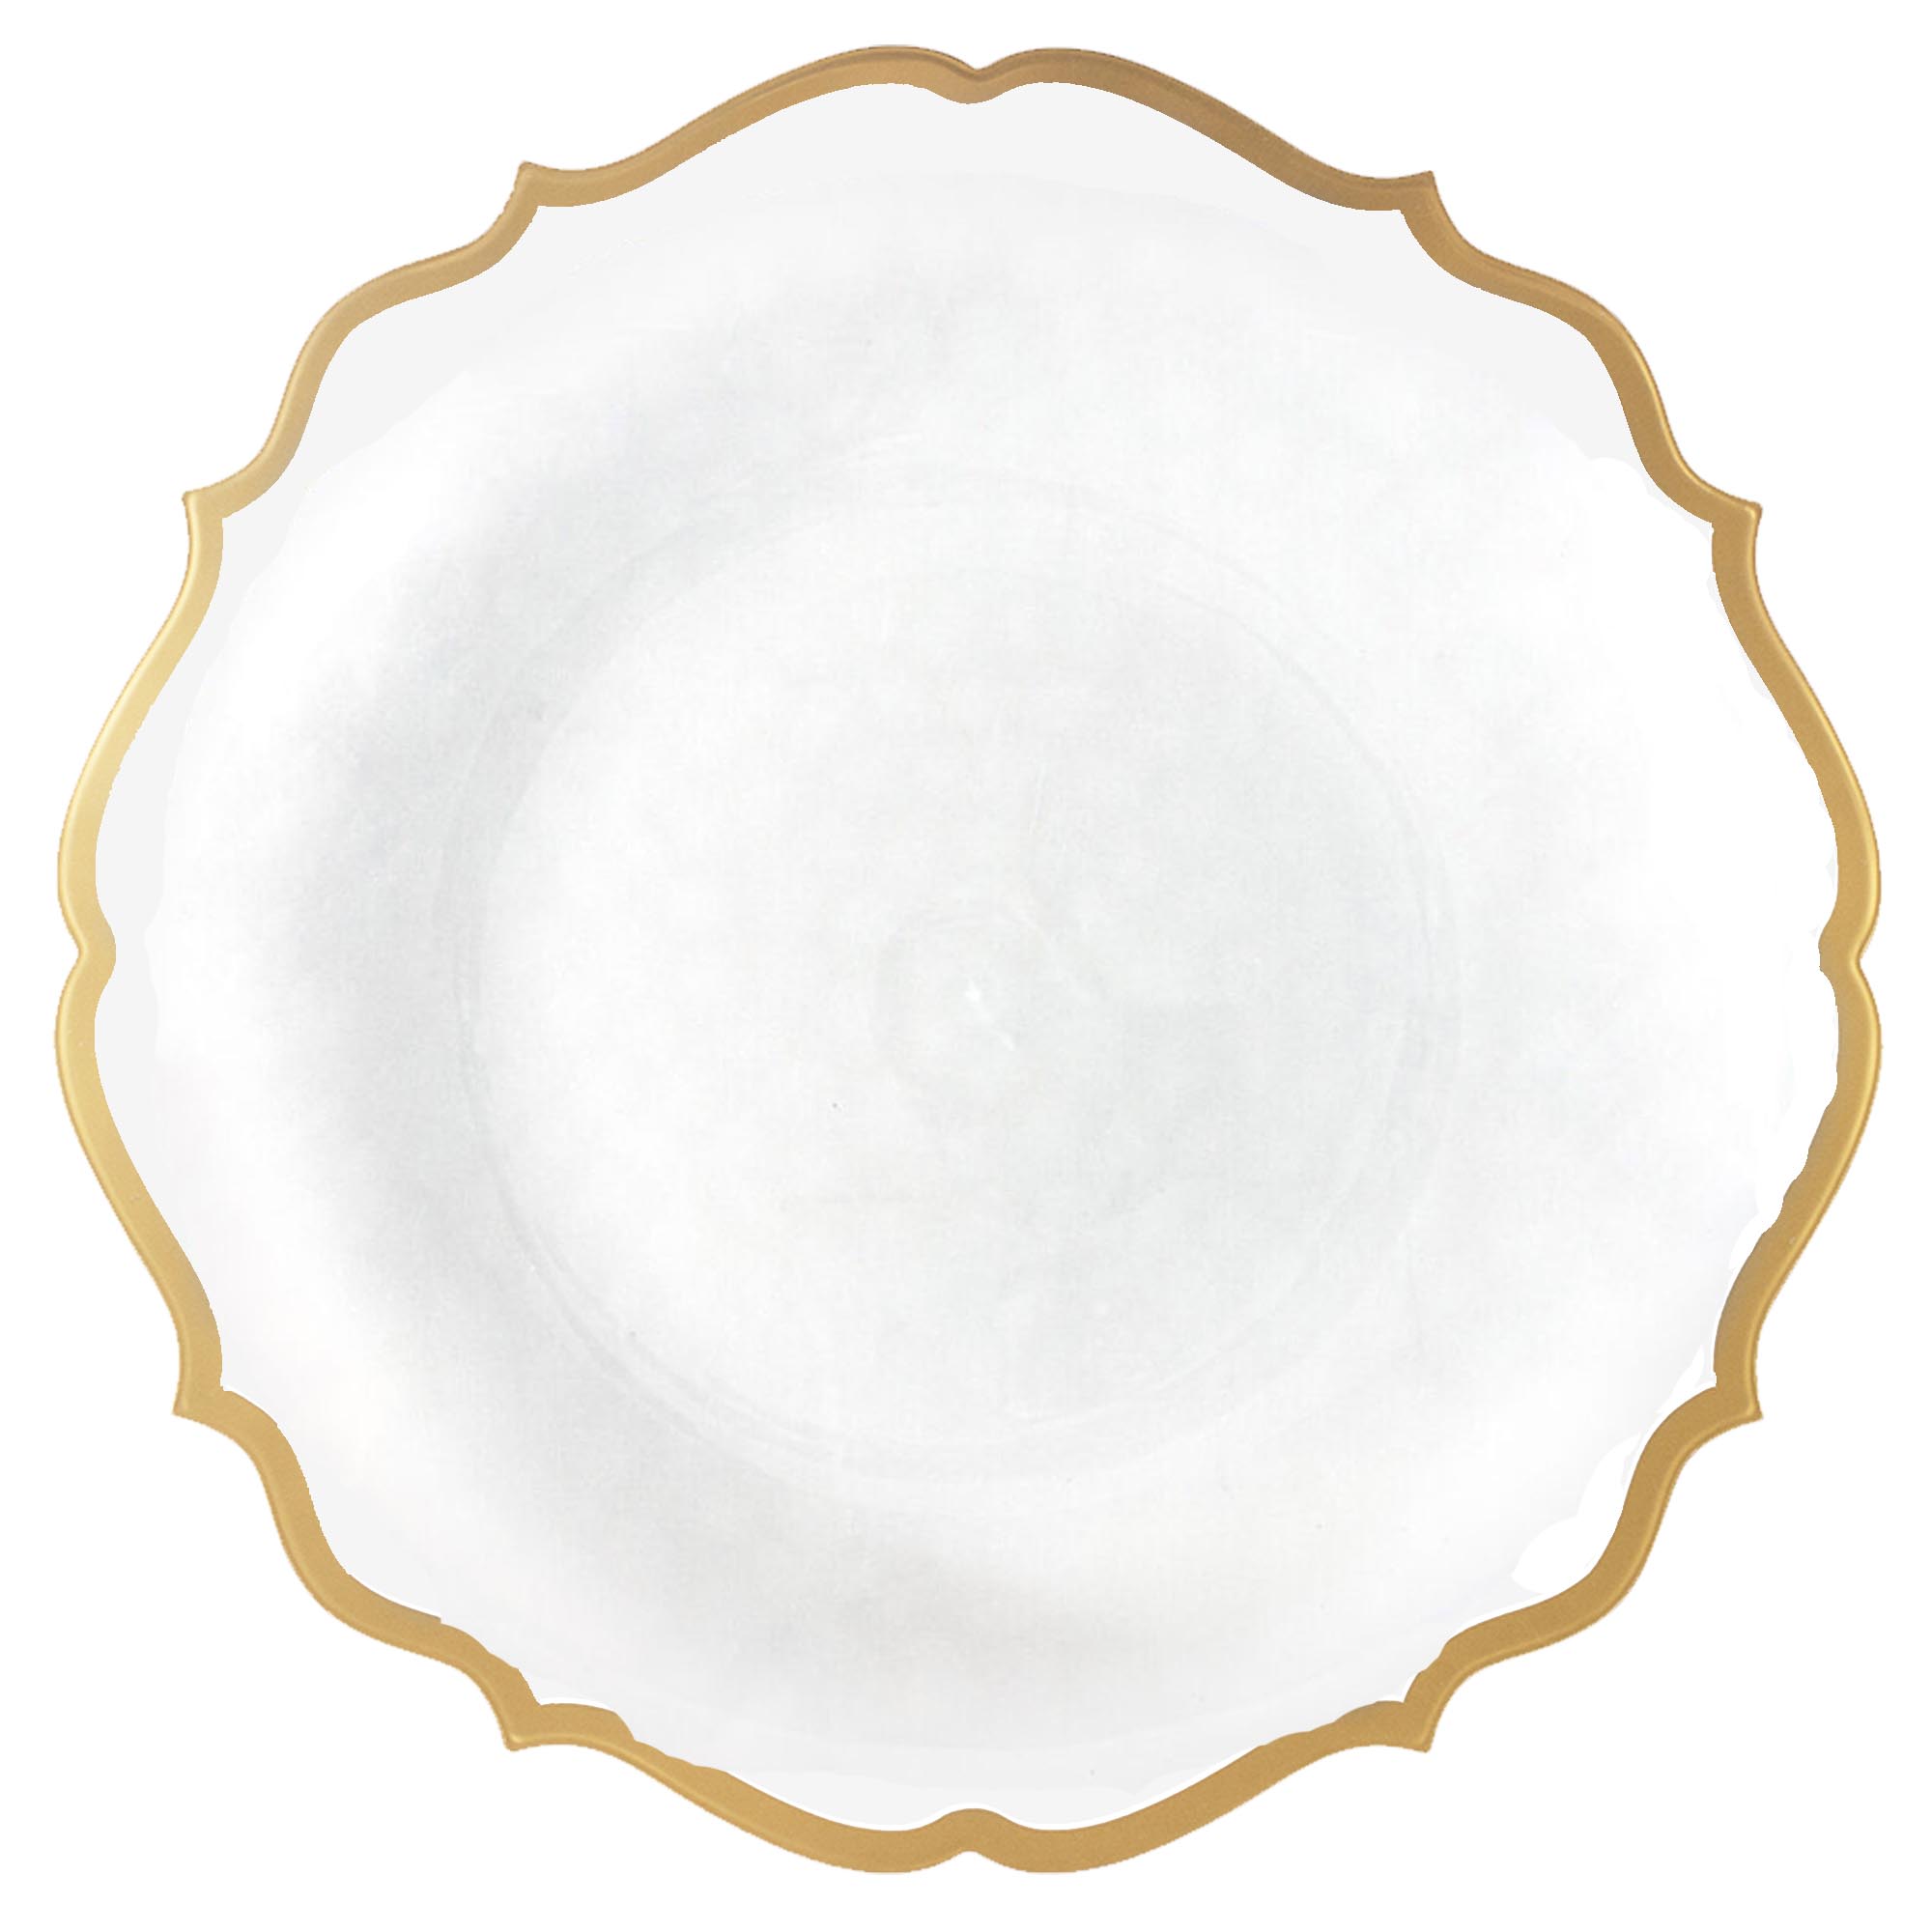 Disposable Fancy White Plastic Plates Gold Rim Contemporary Collection